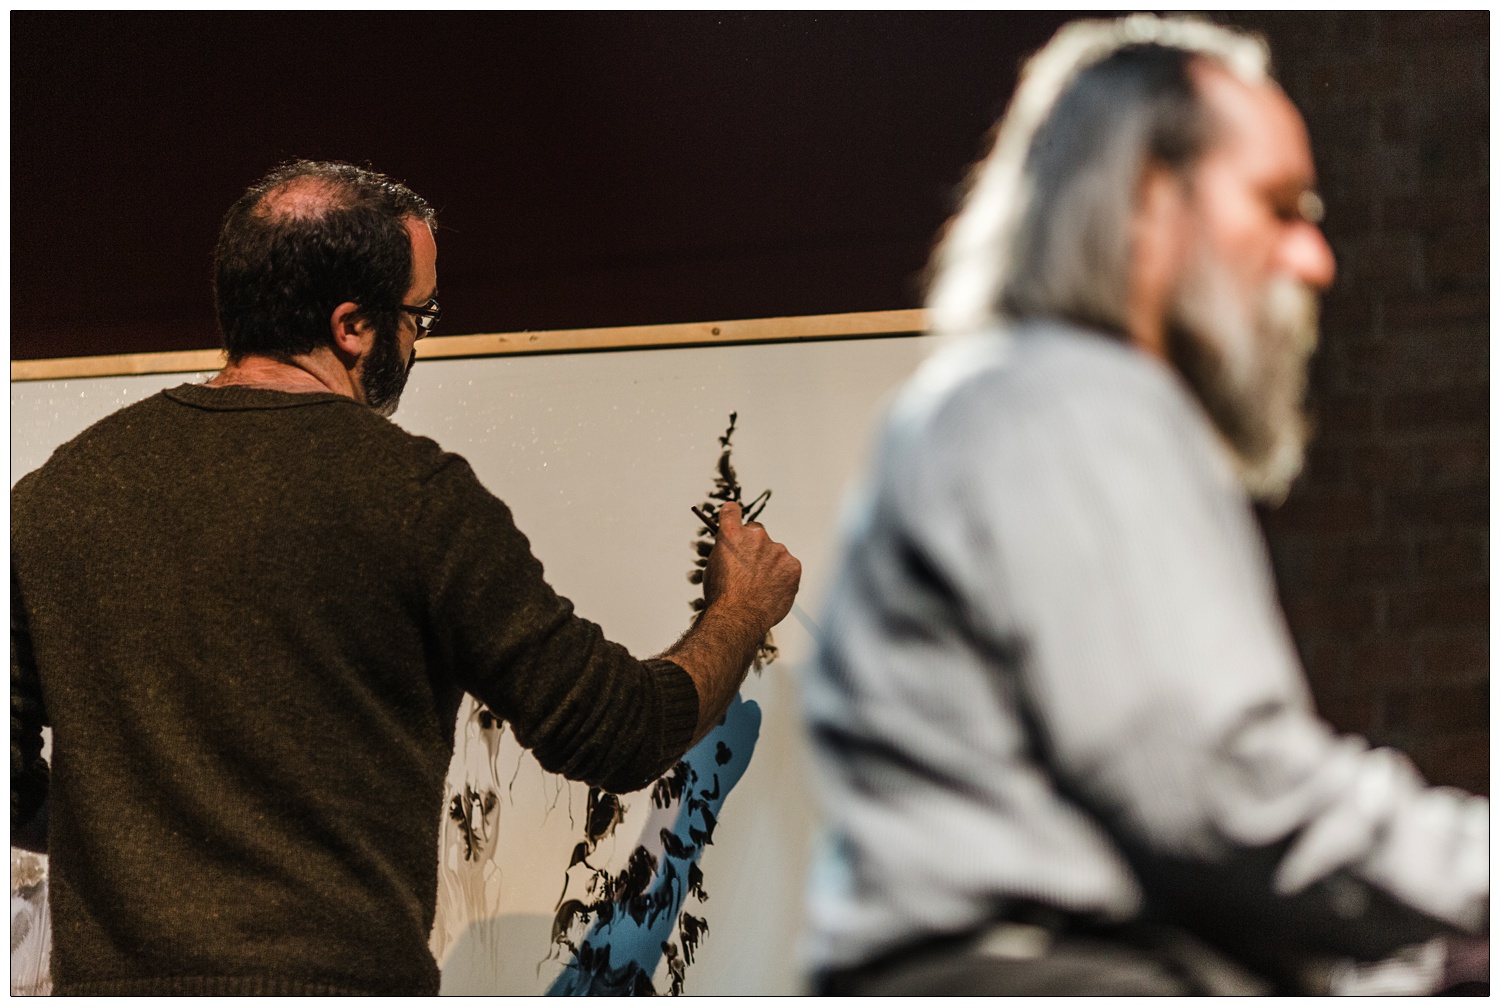 Photograph of out of focus Lubomyr Melnyk playing the piano and Gregory Euclide paints